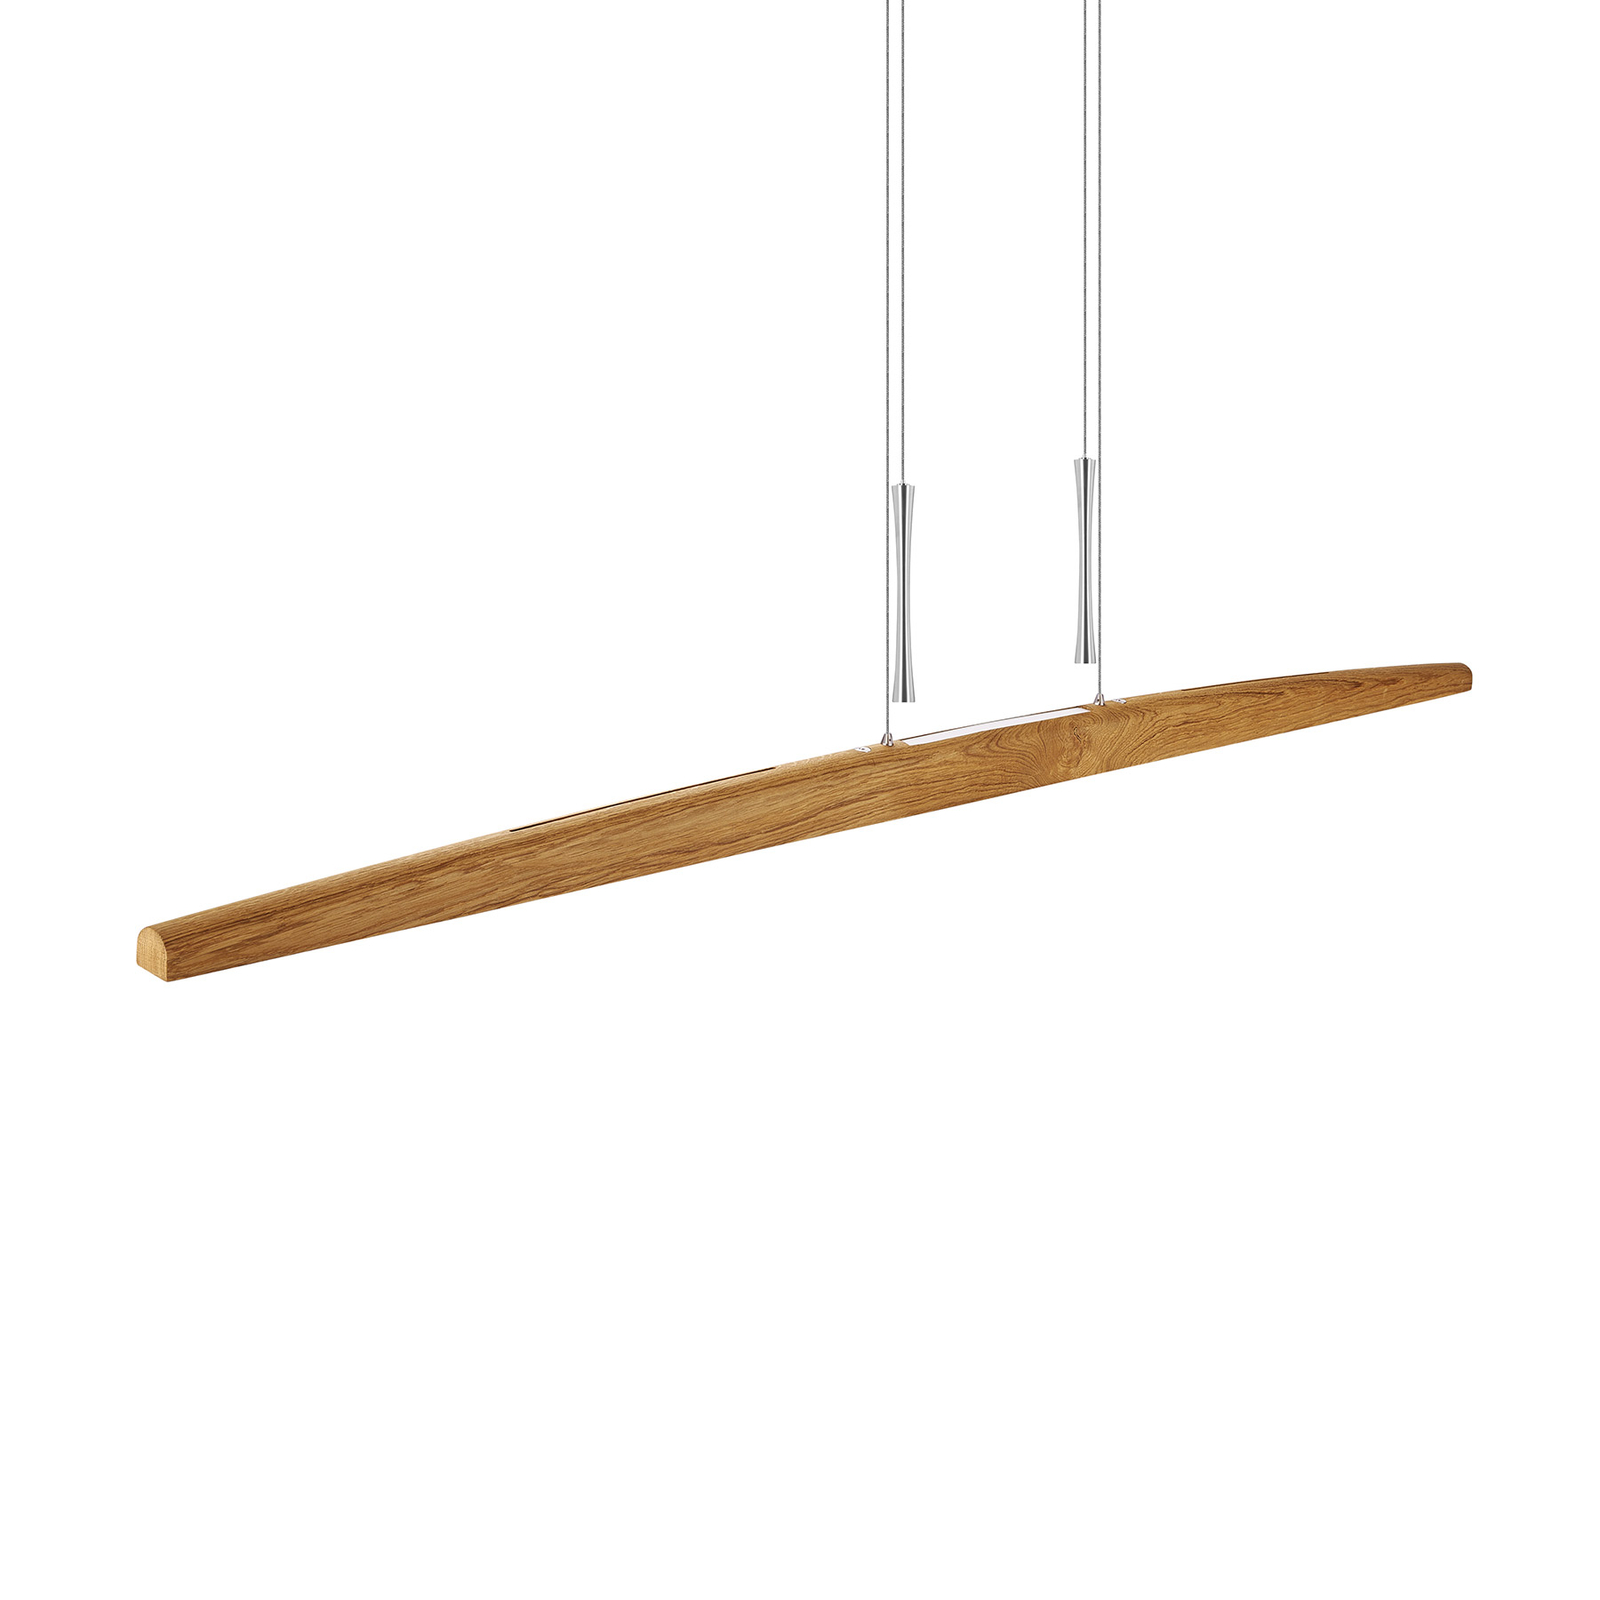 HerzBlut Arco LED hanging light asteich oiled 170cm